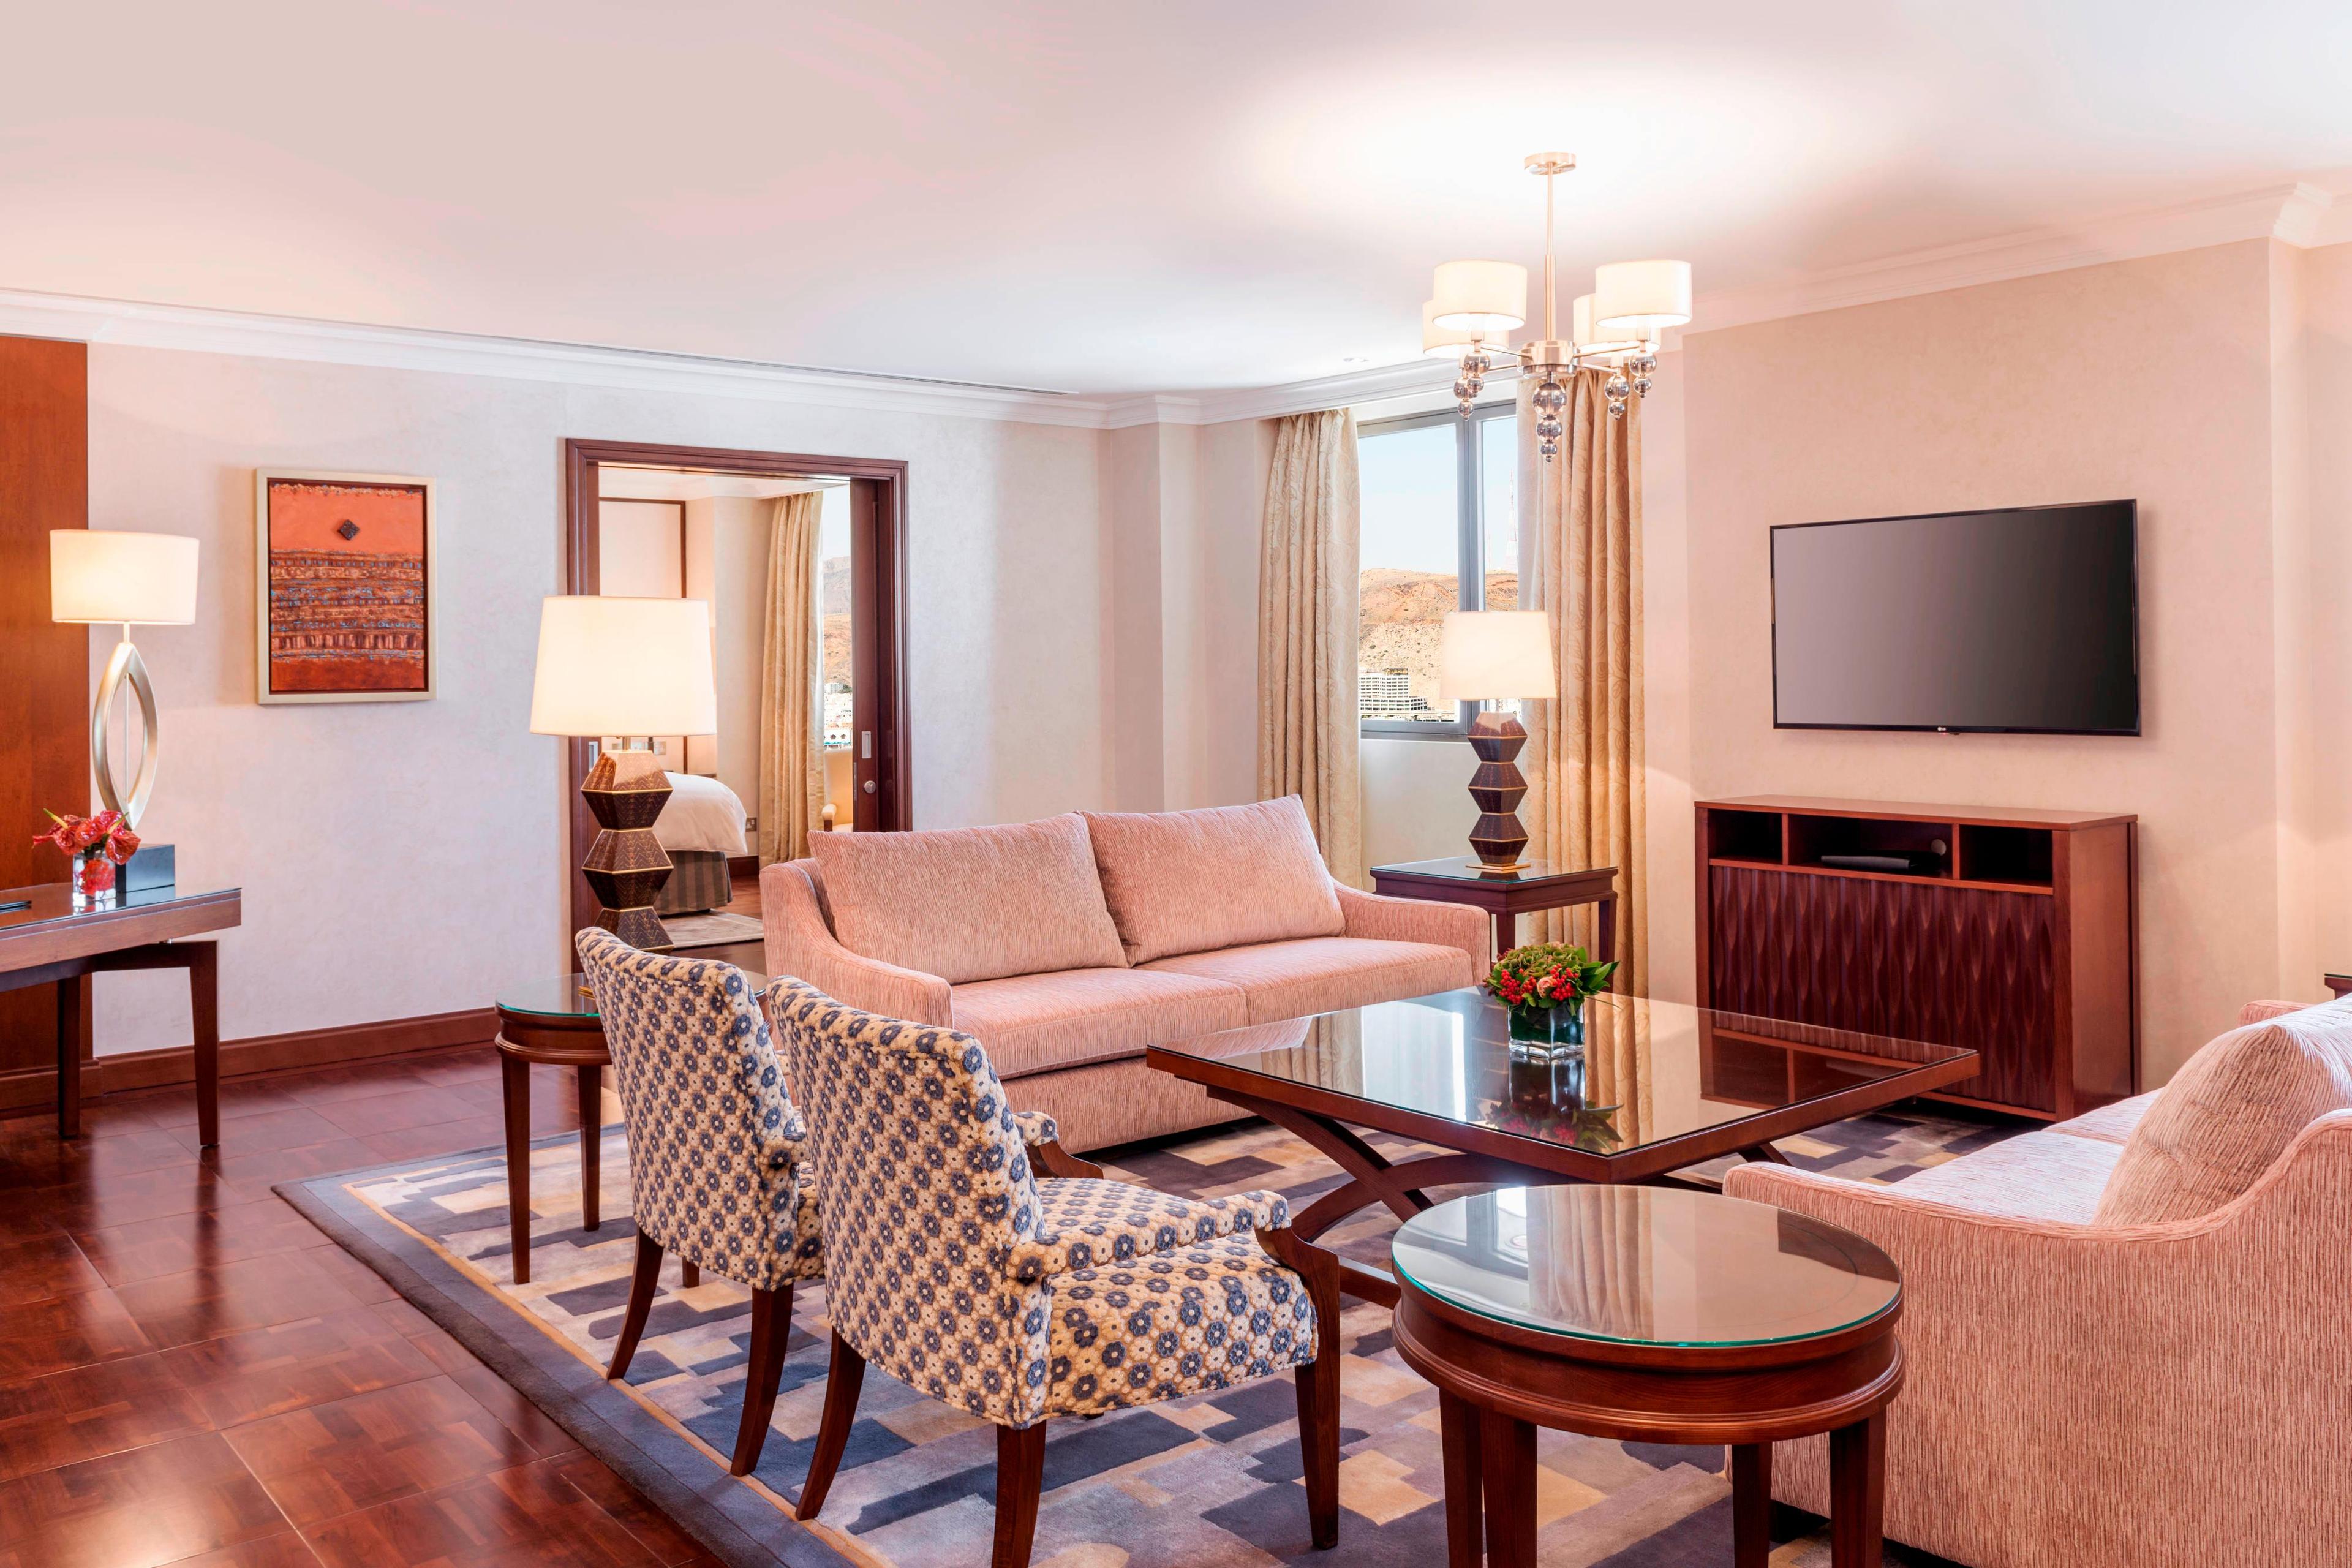 Our 5-star hotel's Diplomatic Suite features a generous lounge area, a dining space and a fully equipped kitchen.